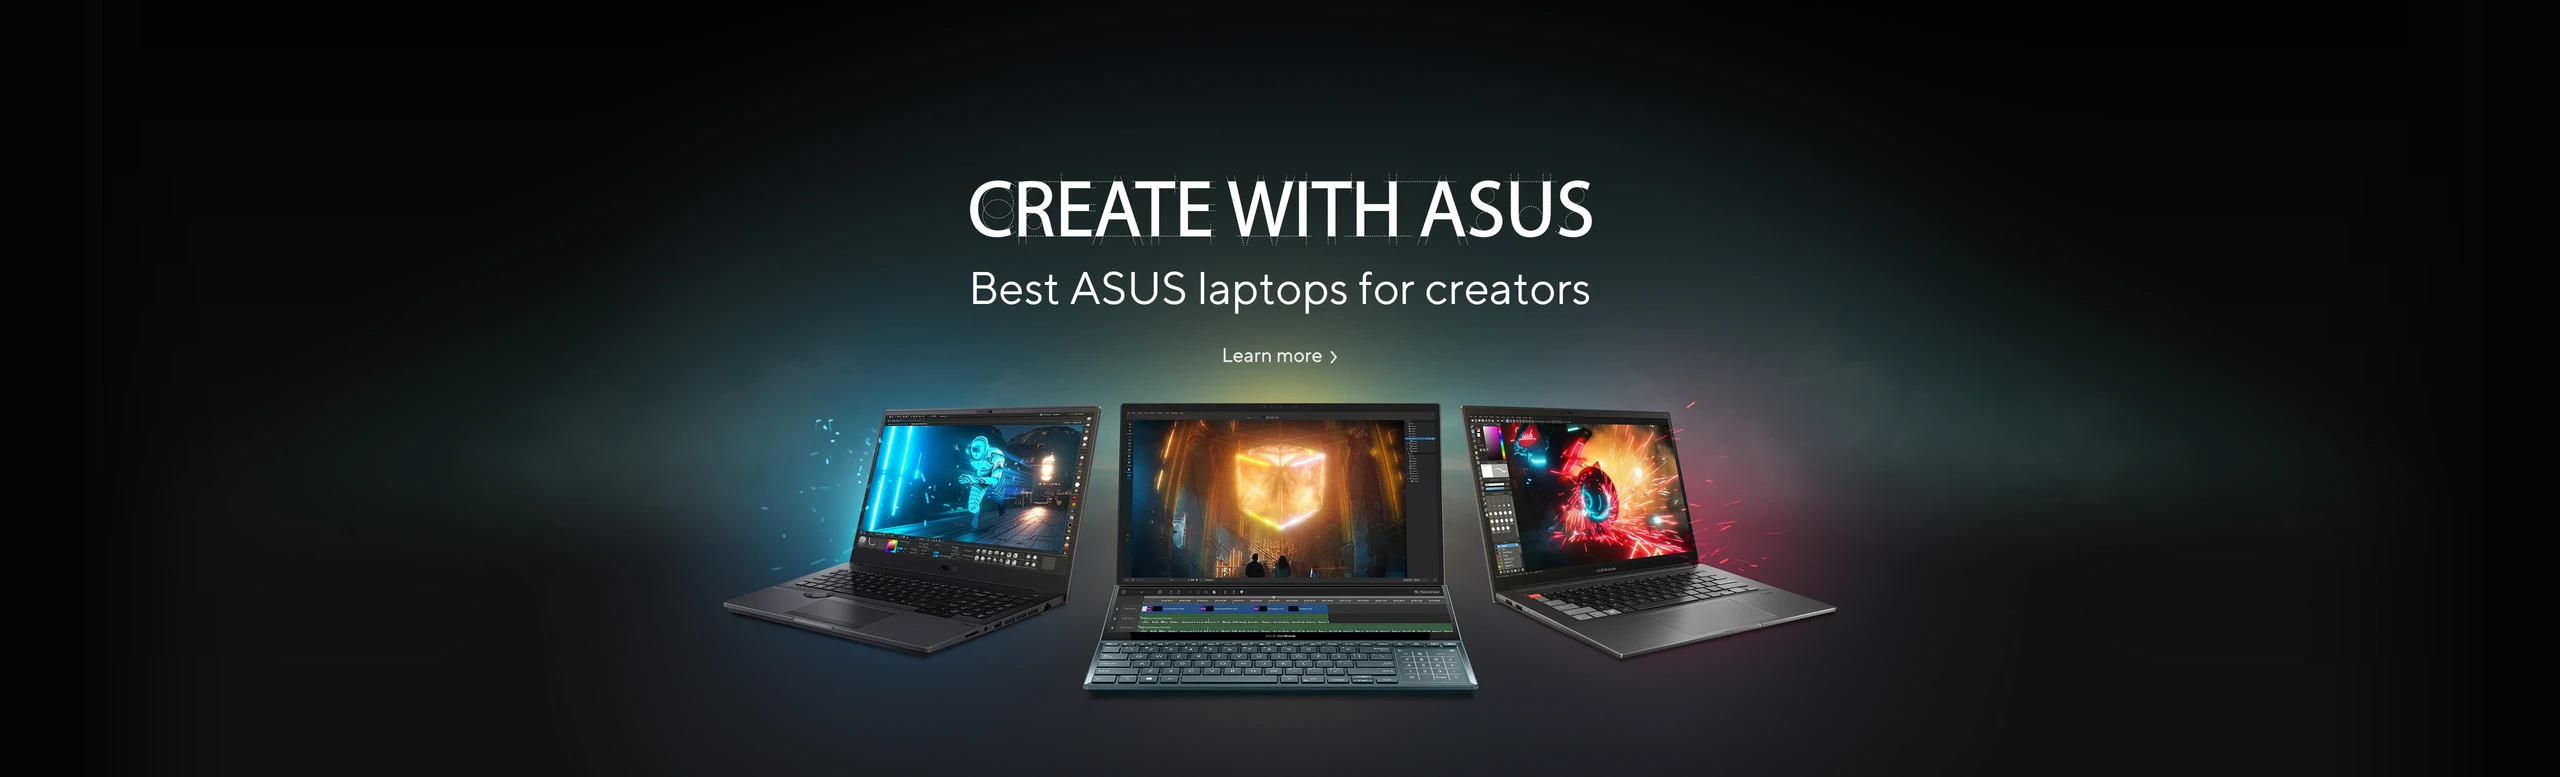 Create with ASUS. Best ASUS laptops for creators